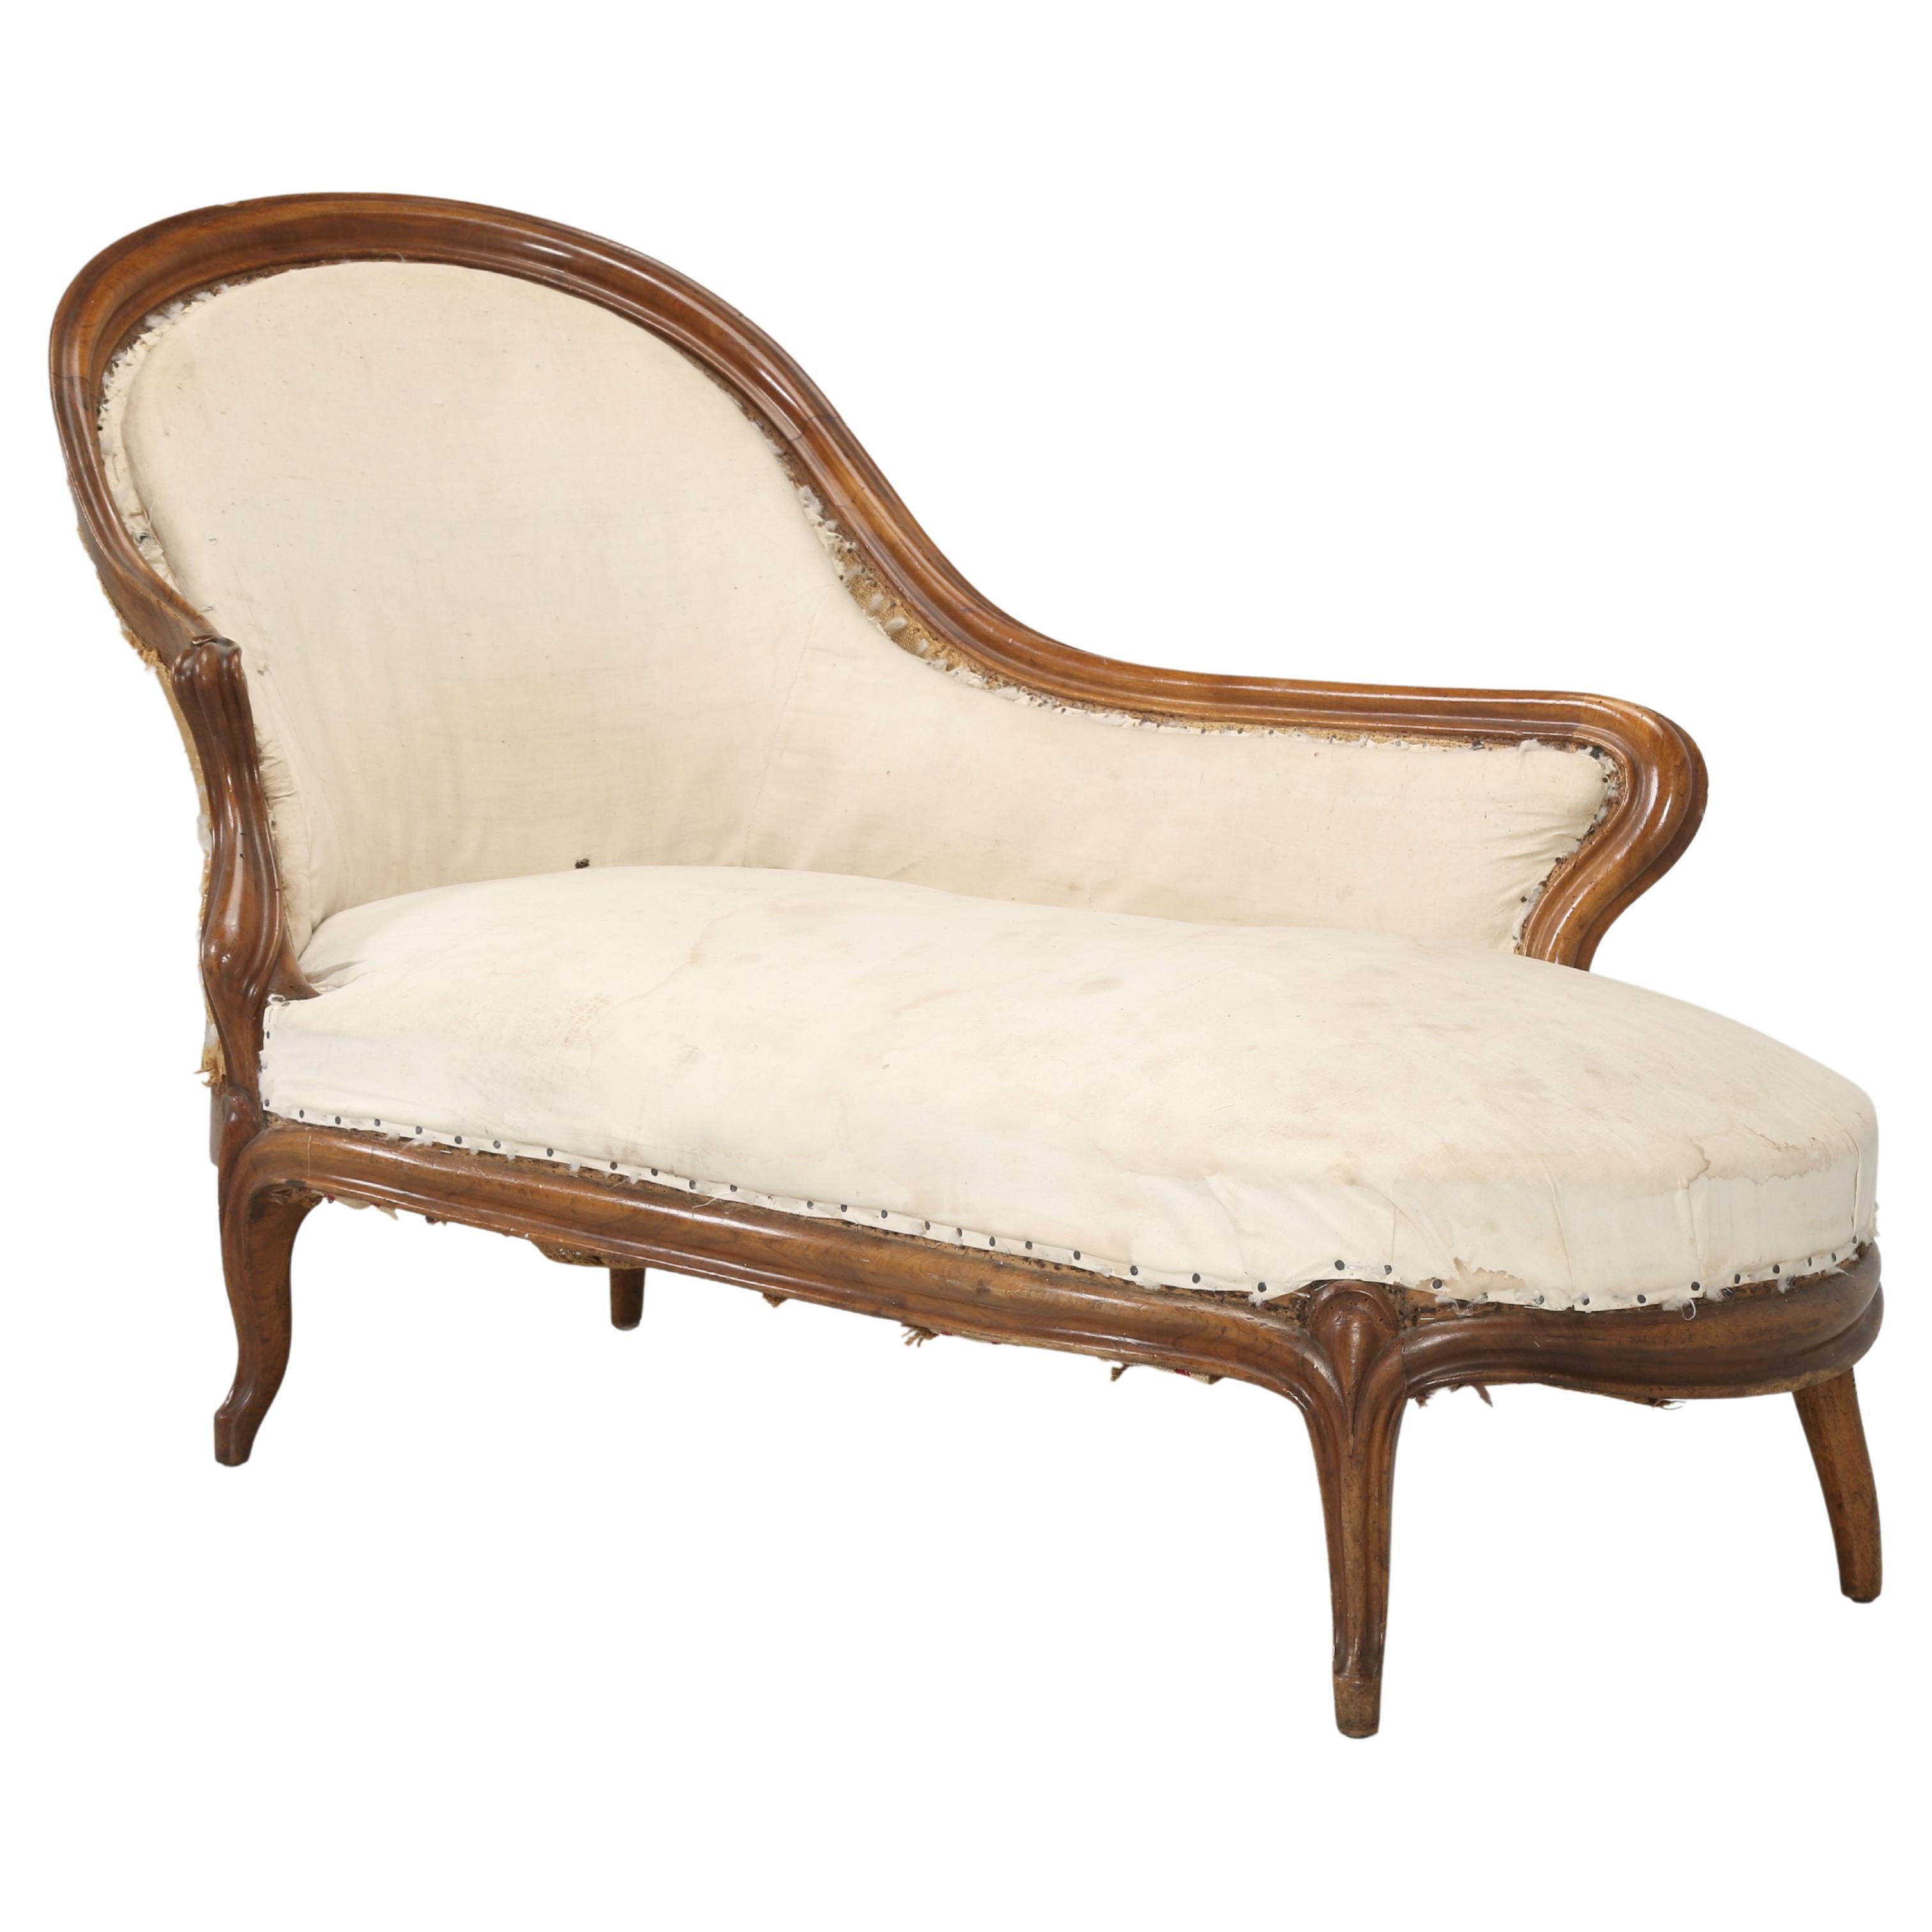 Antique French Chaise Lounge in Figured Walnut in the Méridienne Style, c1860's